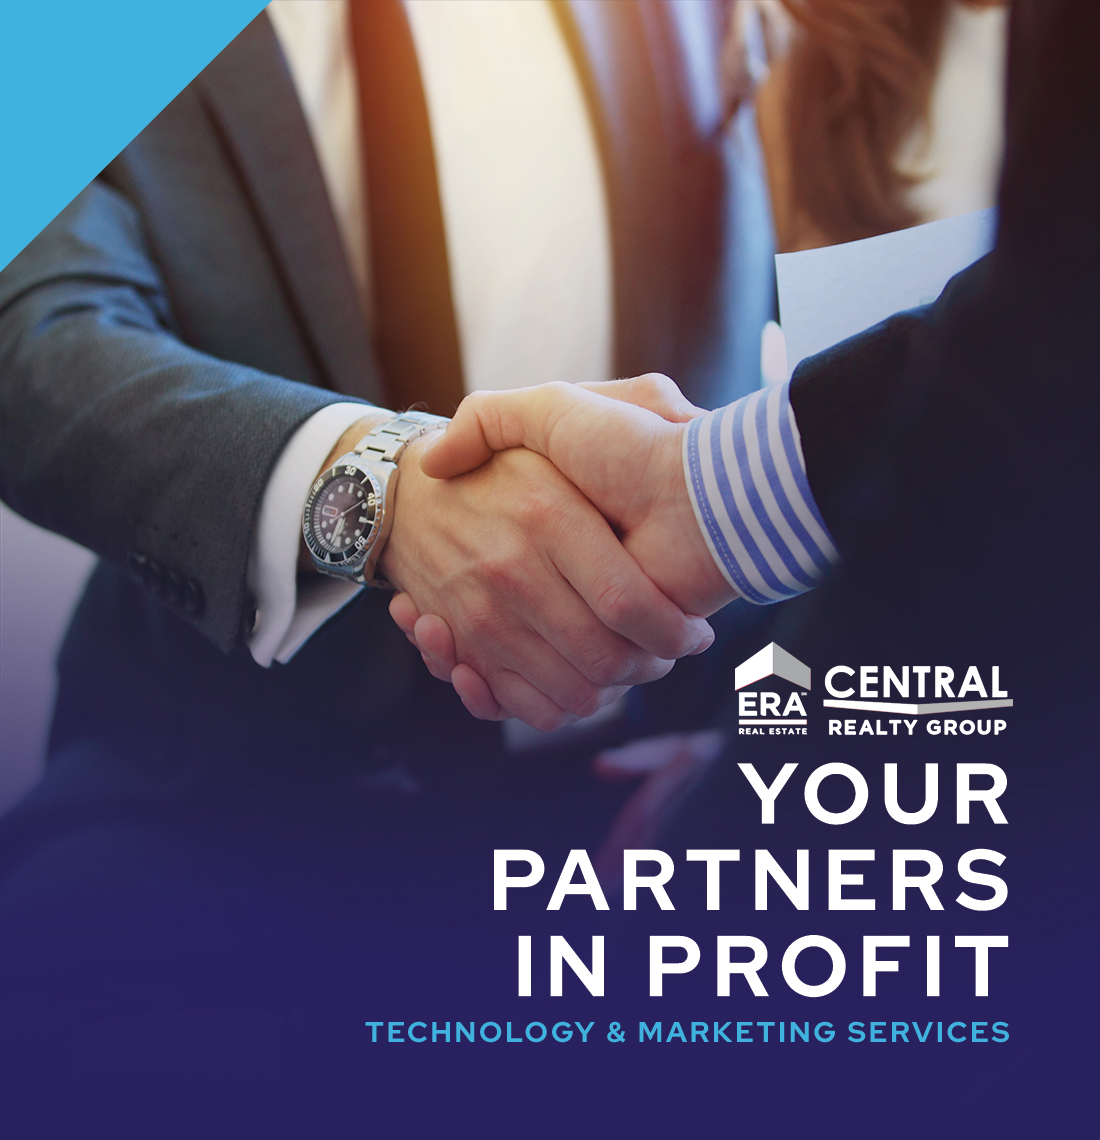 ERA Central - Your Partners in Profit